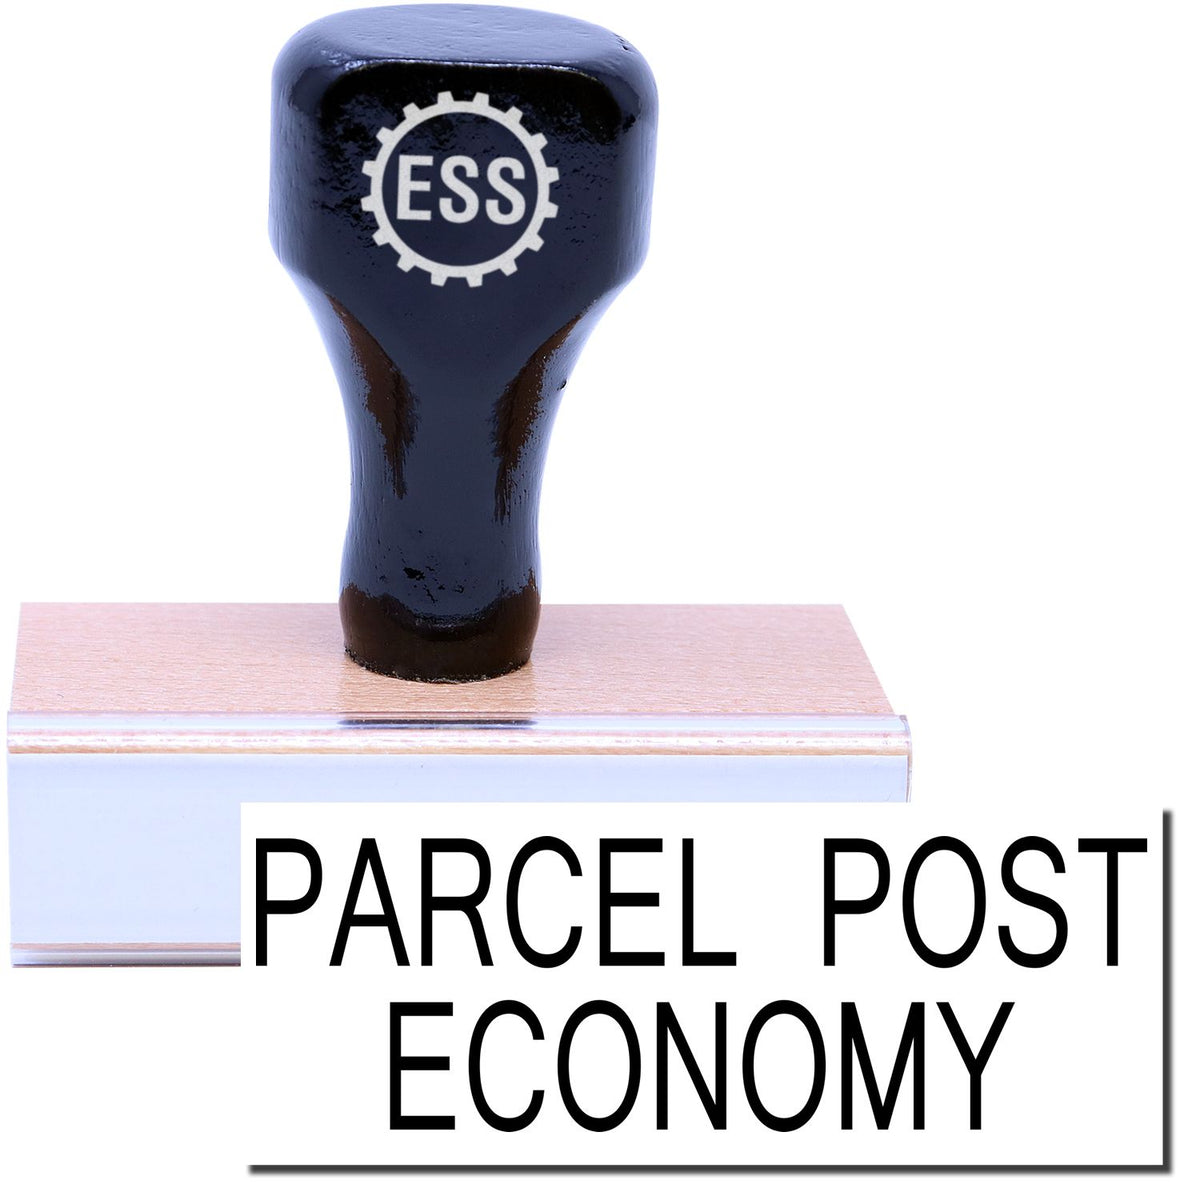 A stock office rubber stamp with a stamped image showing how the text &quot;PARCEL POST ECONOMY&quot; in a large font is displayed after stamping.